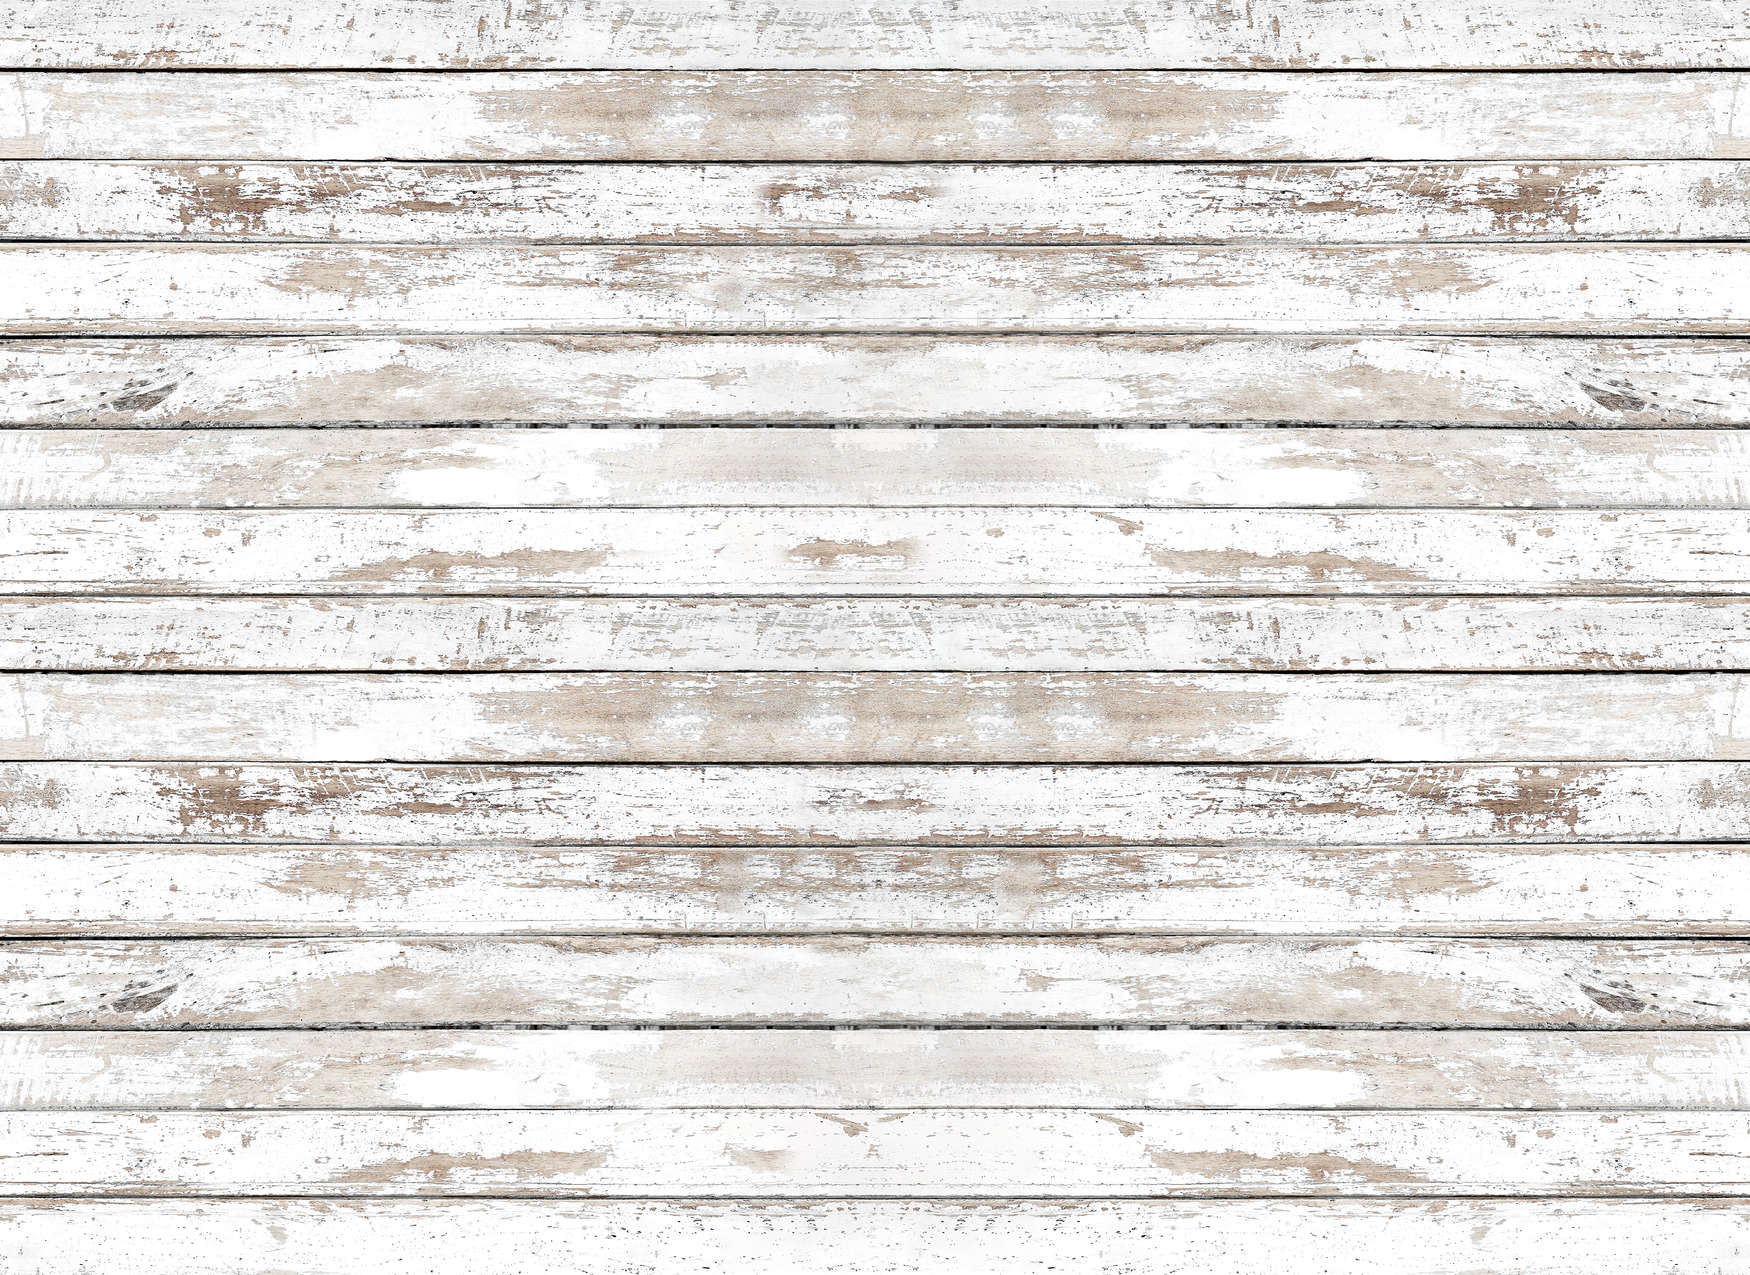             Wooden wall mural with horizontal boards natural - White, Beige
        